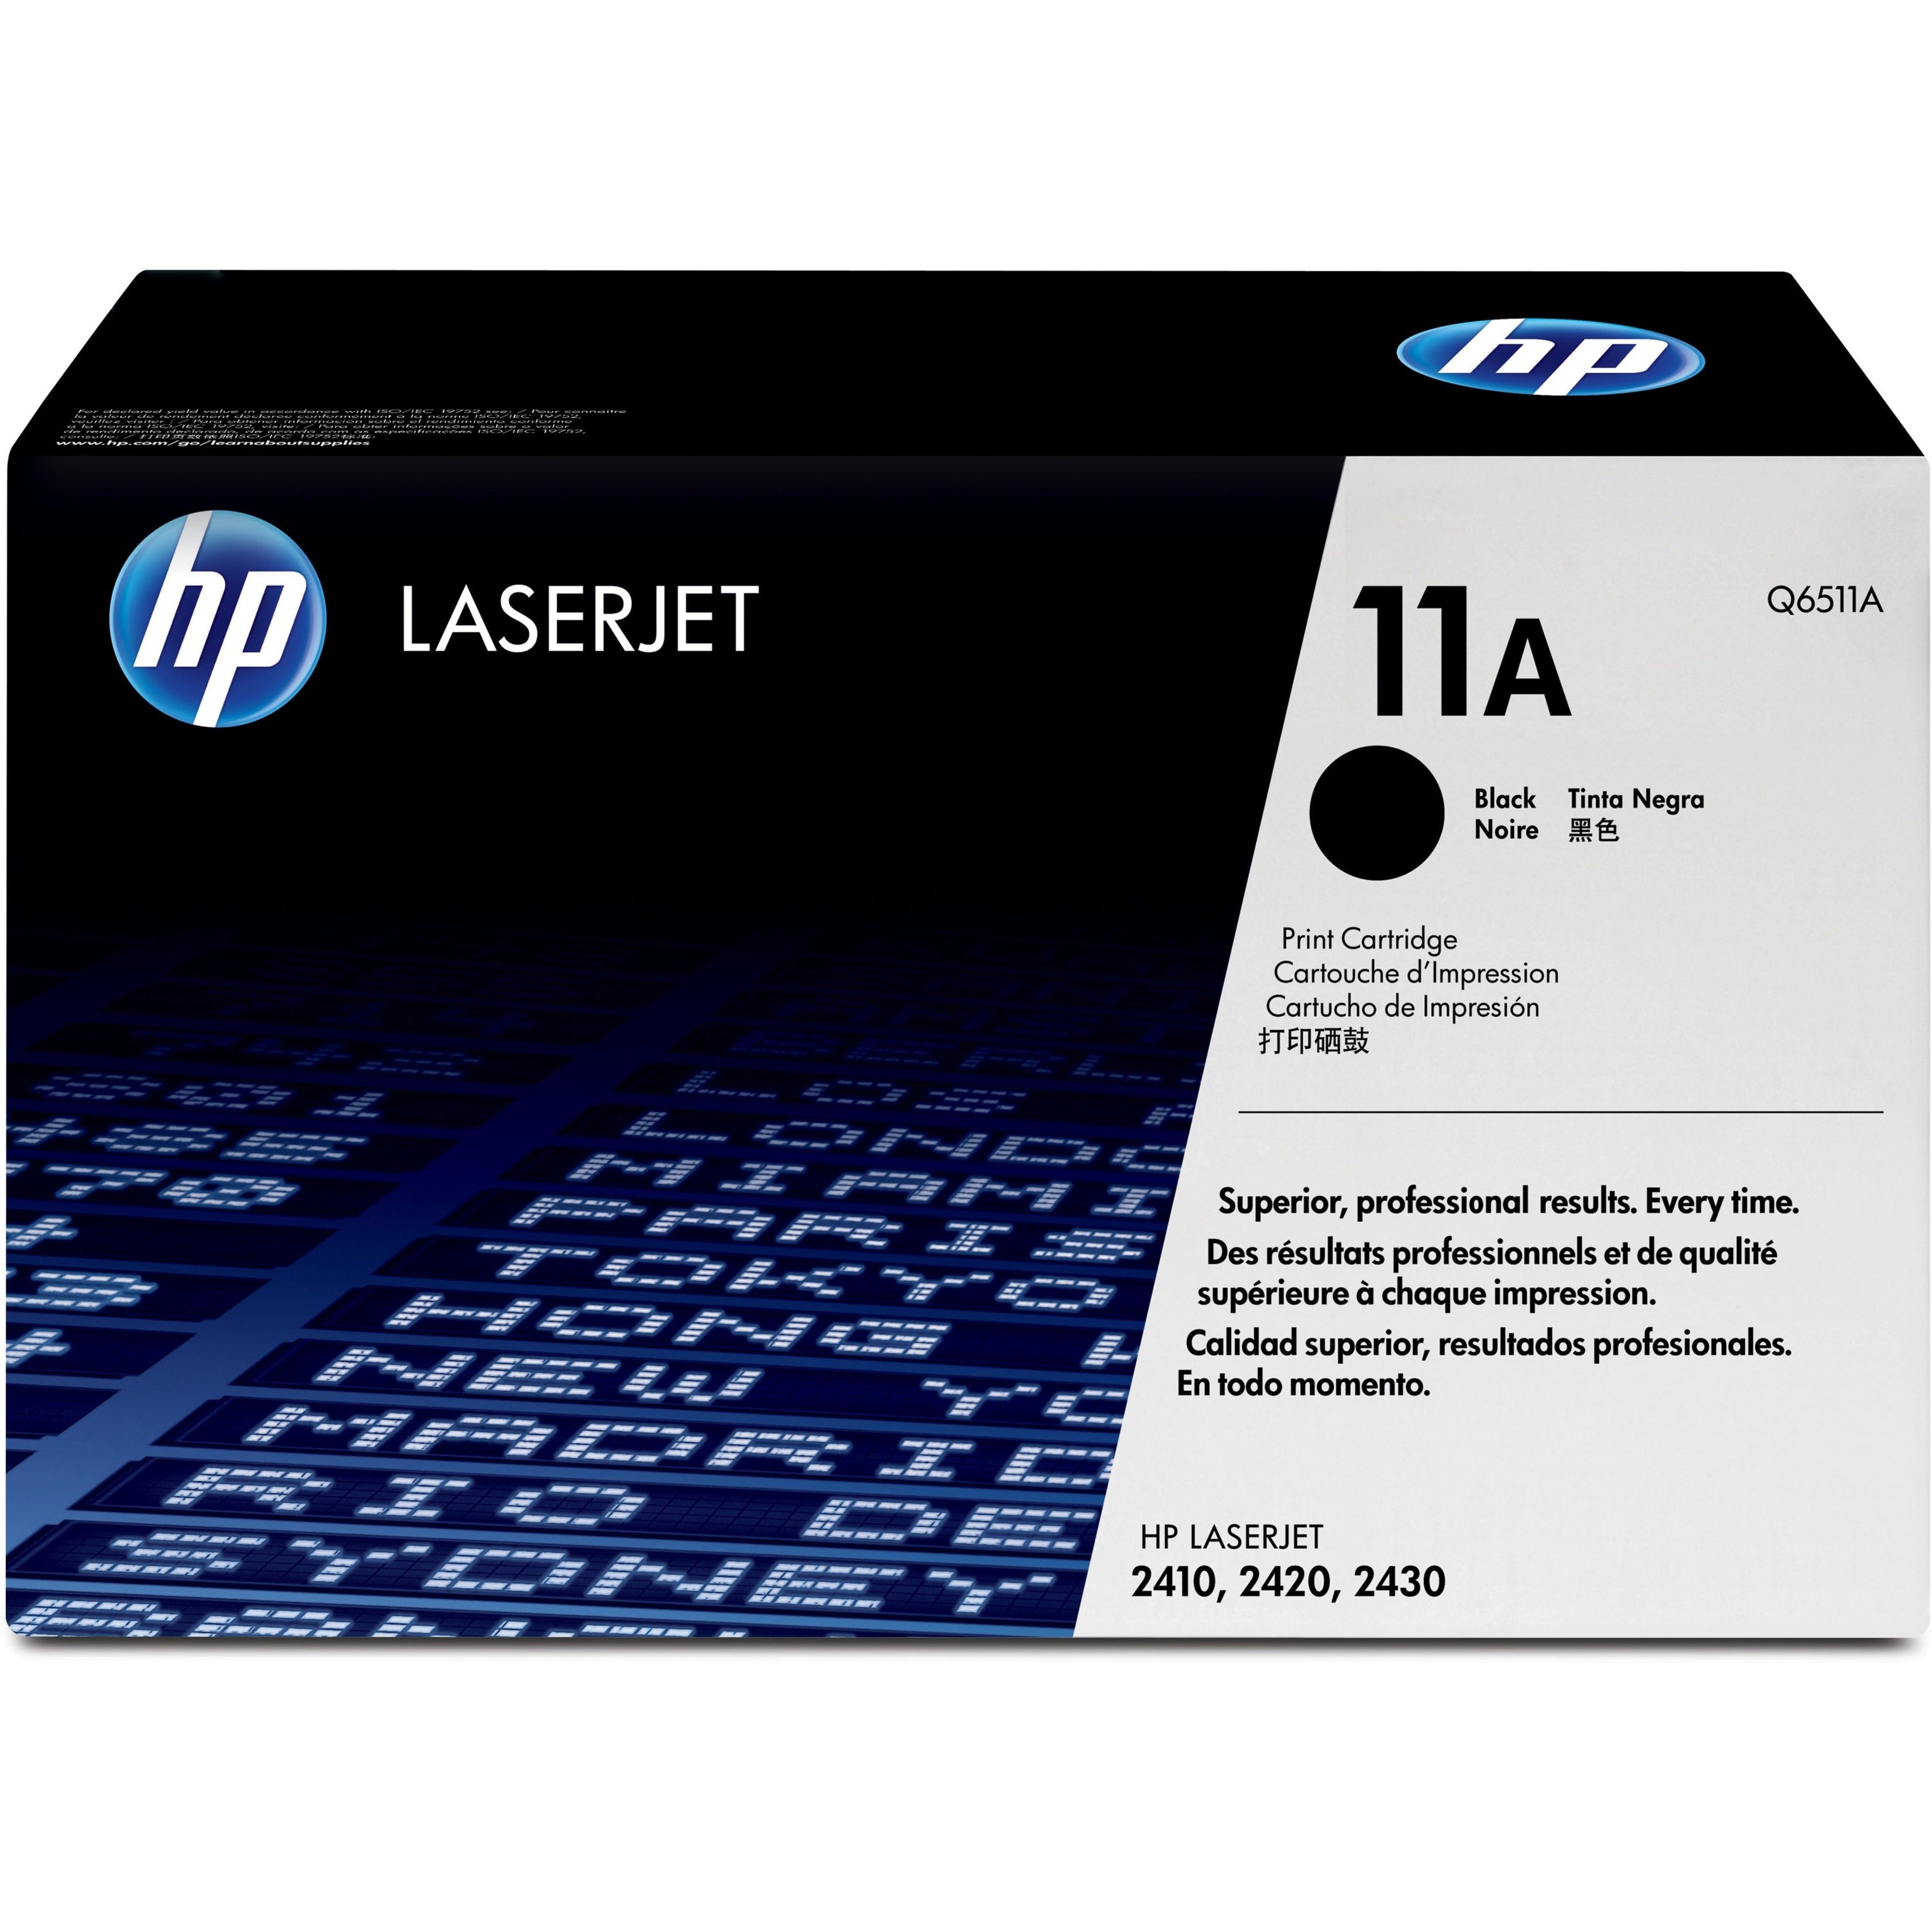 HP Q6511A 11A Toner Cartridge For LaserJet 2400, 6000 Page Yield, Black